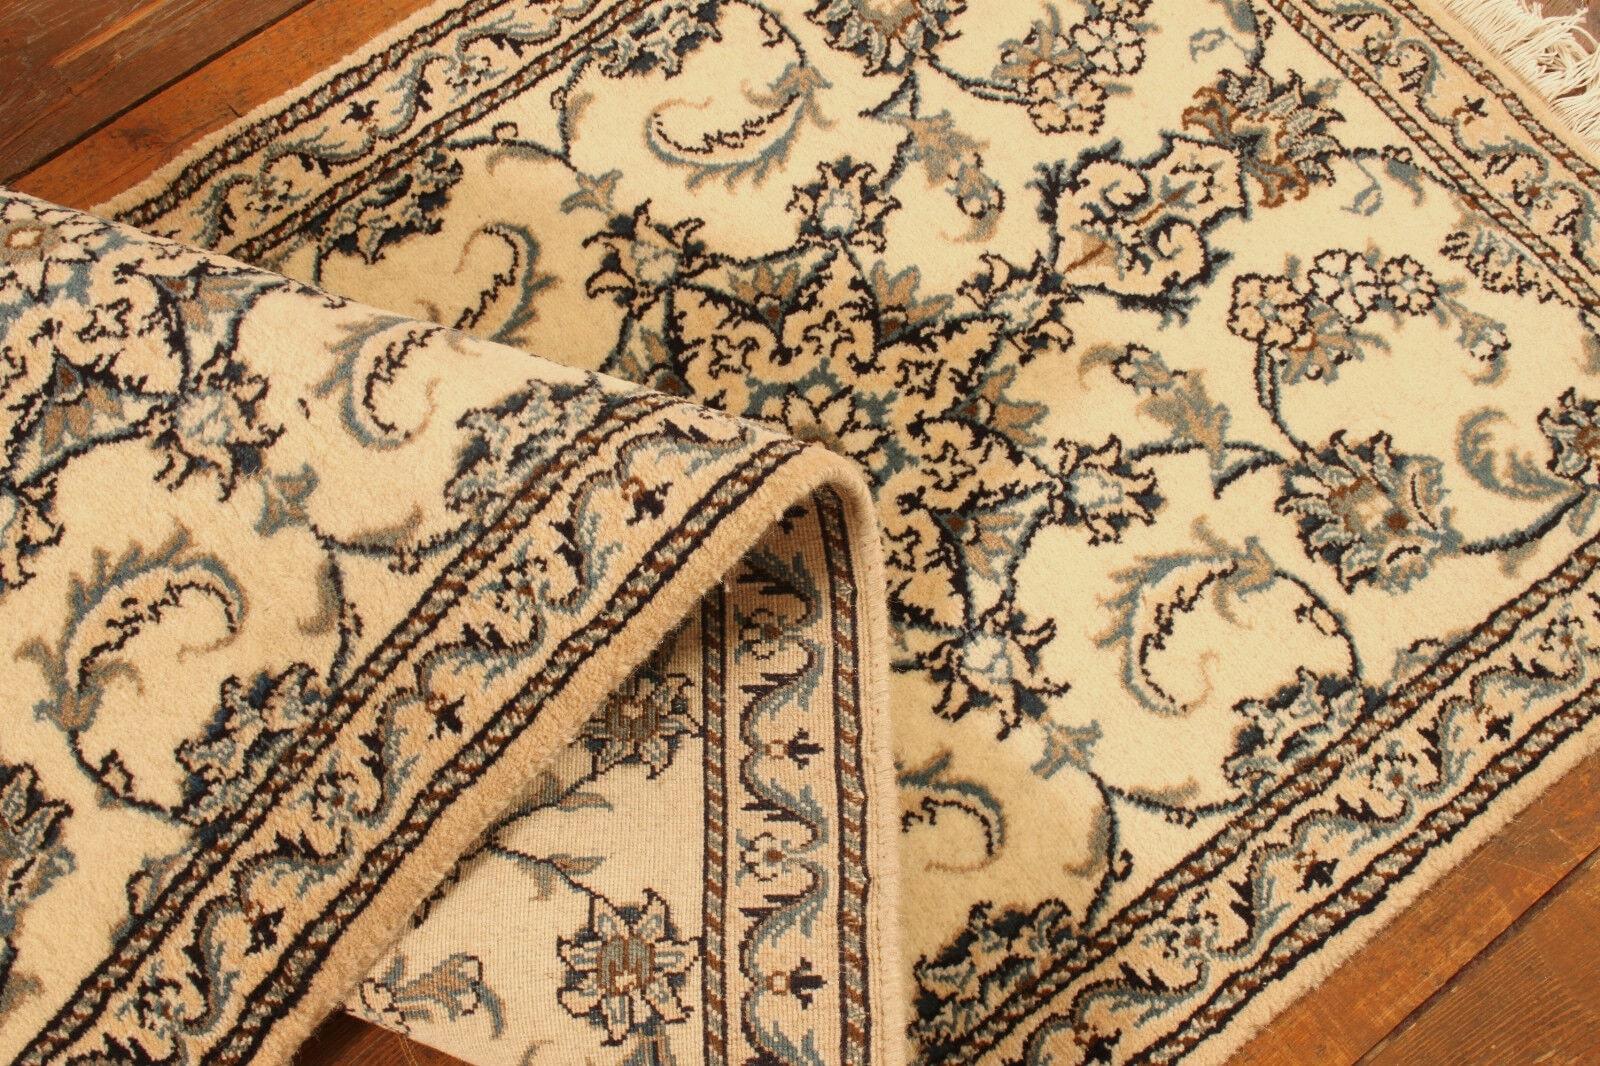 Handmade Vintage Persian Style Nain Runner Rug (2.5’ x 6.3’ / 77cm x 193cm)

Enhance your home with the classic elegance of our Handmade Vintage Persian Style Nain Runner Rug. Dating back to the 1980s, this woolen runner rug measures 2.5’ x 6.3’